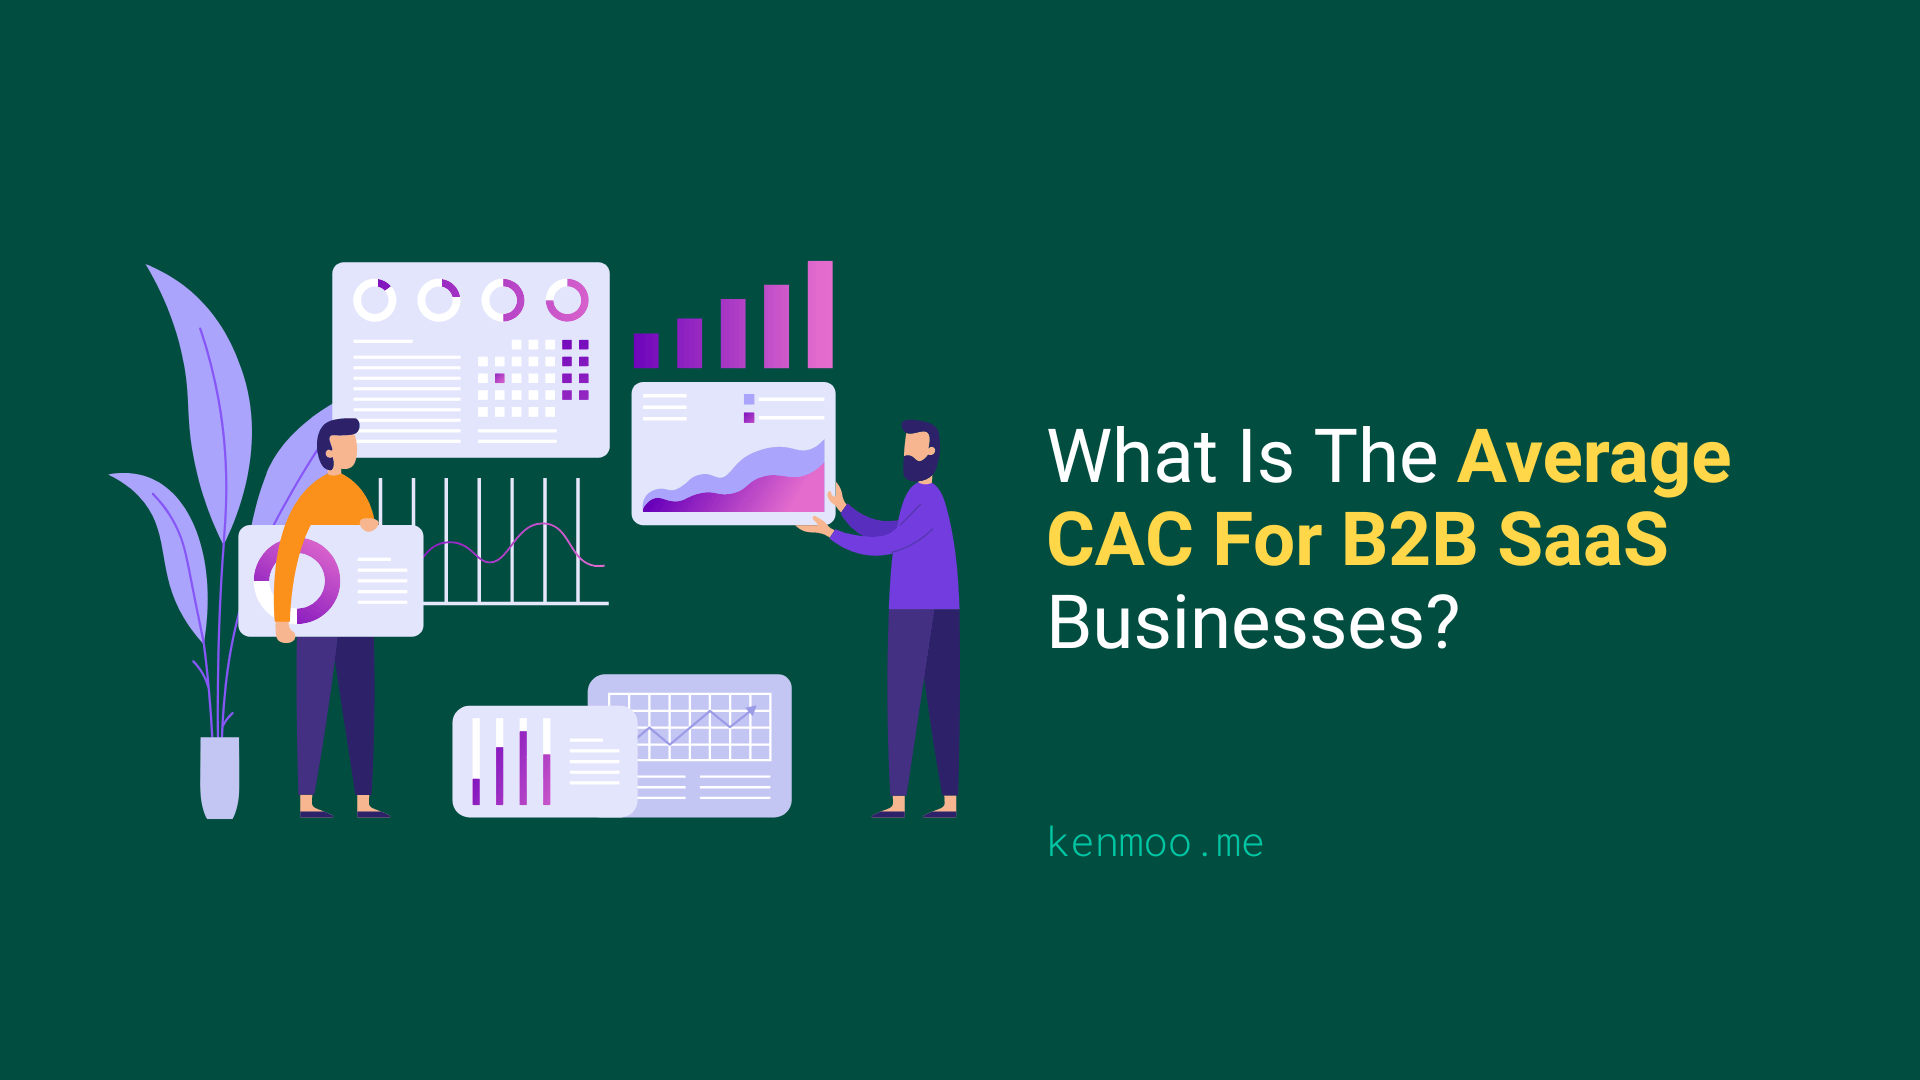 What Is The Average CAC For B2B SaaS Businesses?